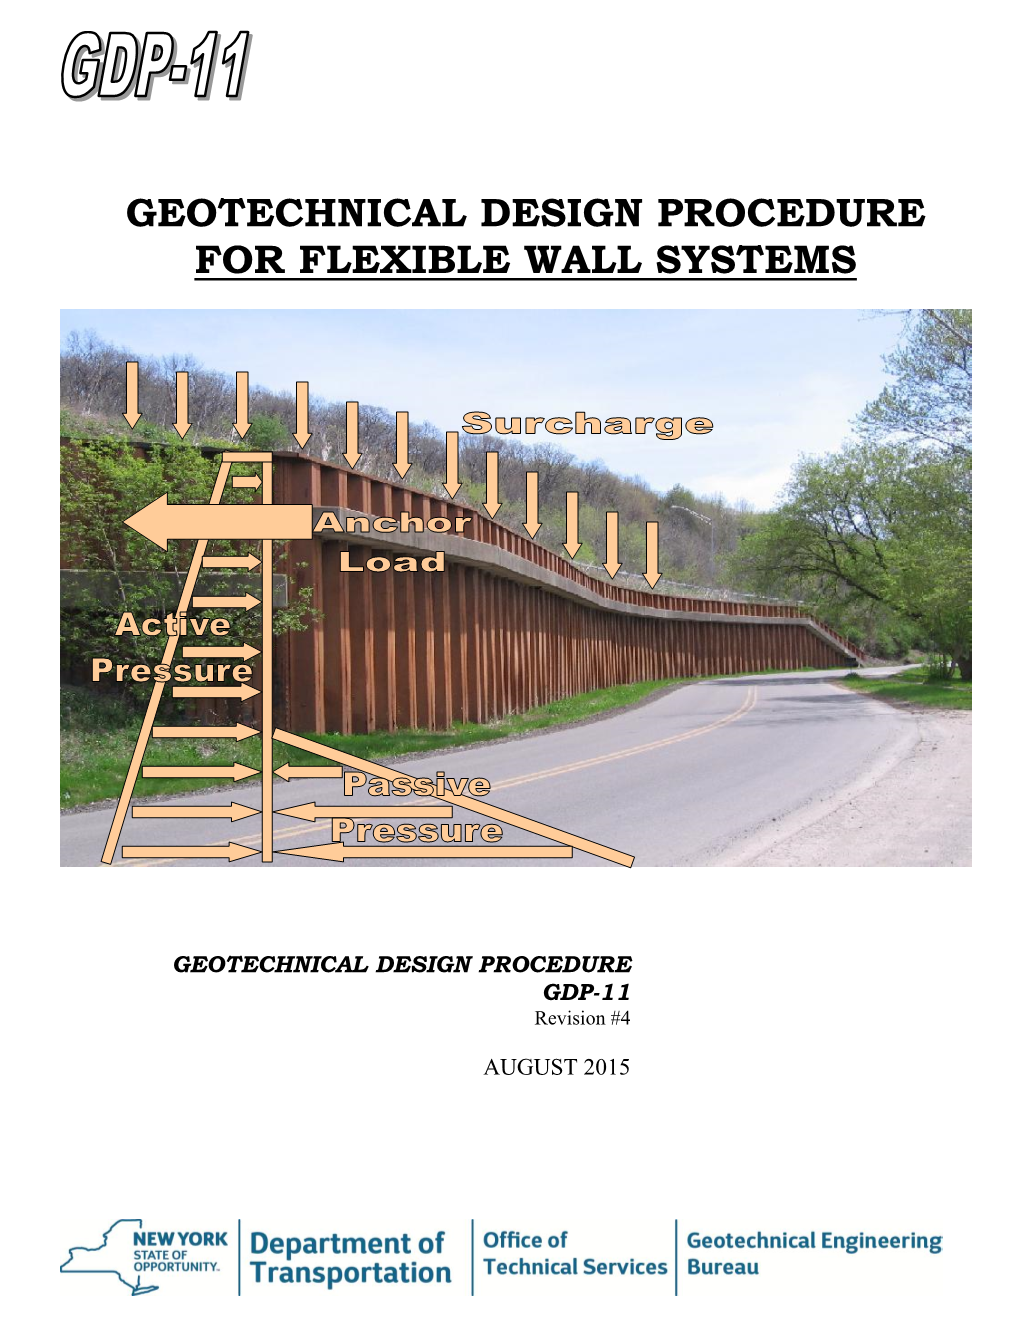 Geotechnical Design Procedure for Flexible Wall Systems